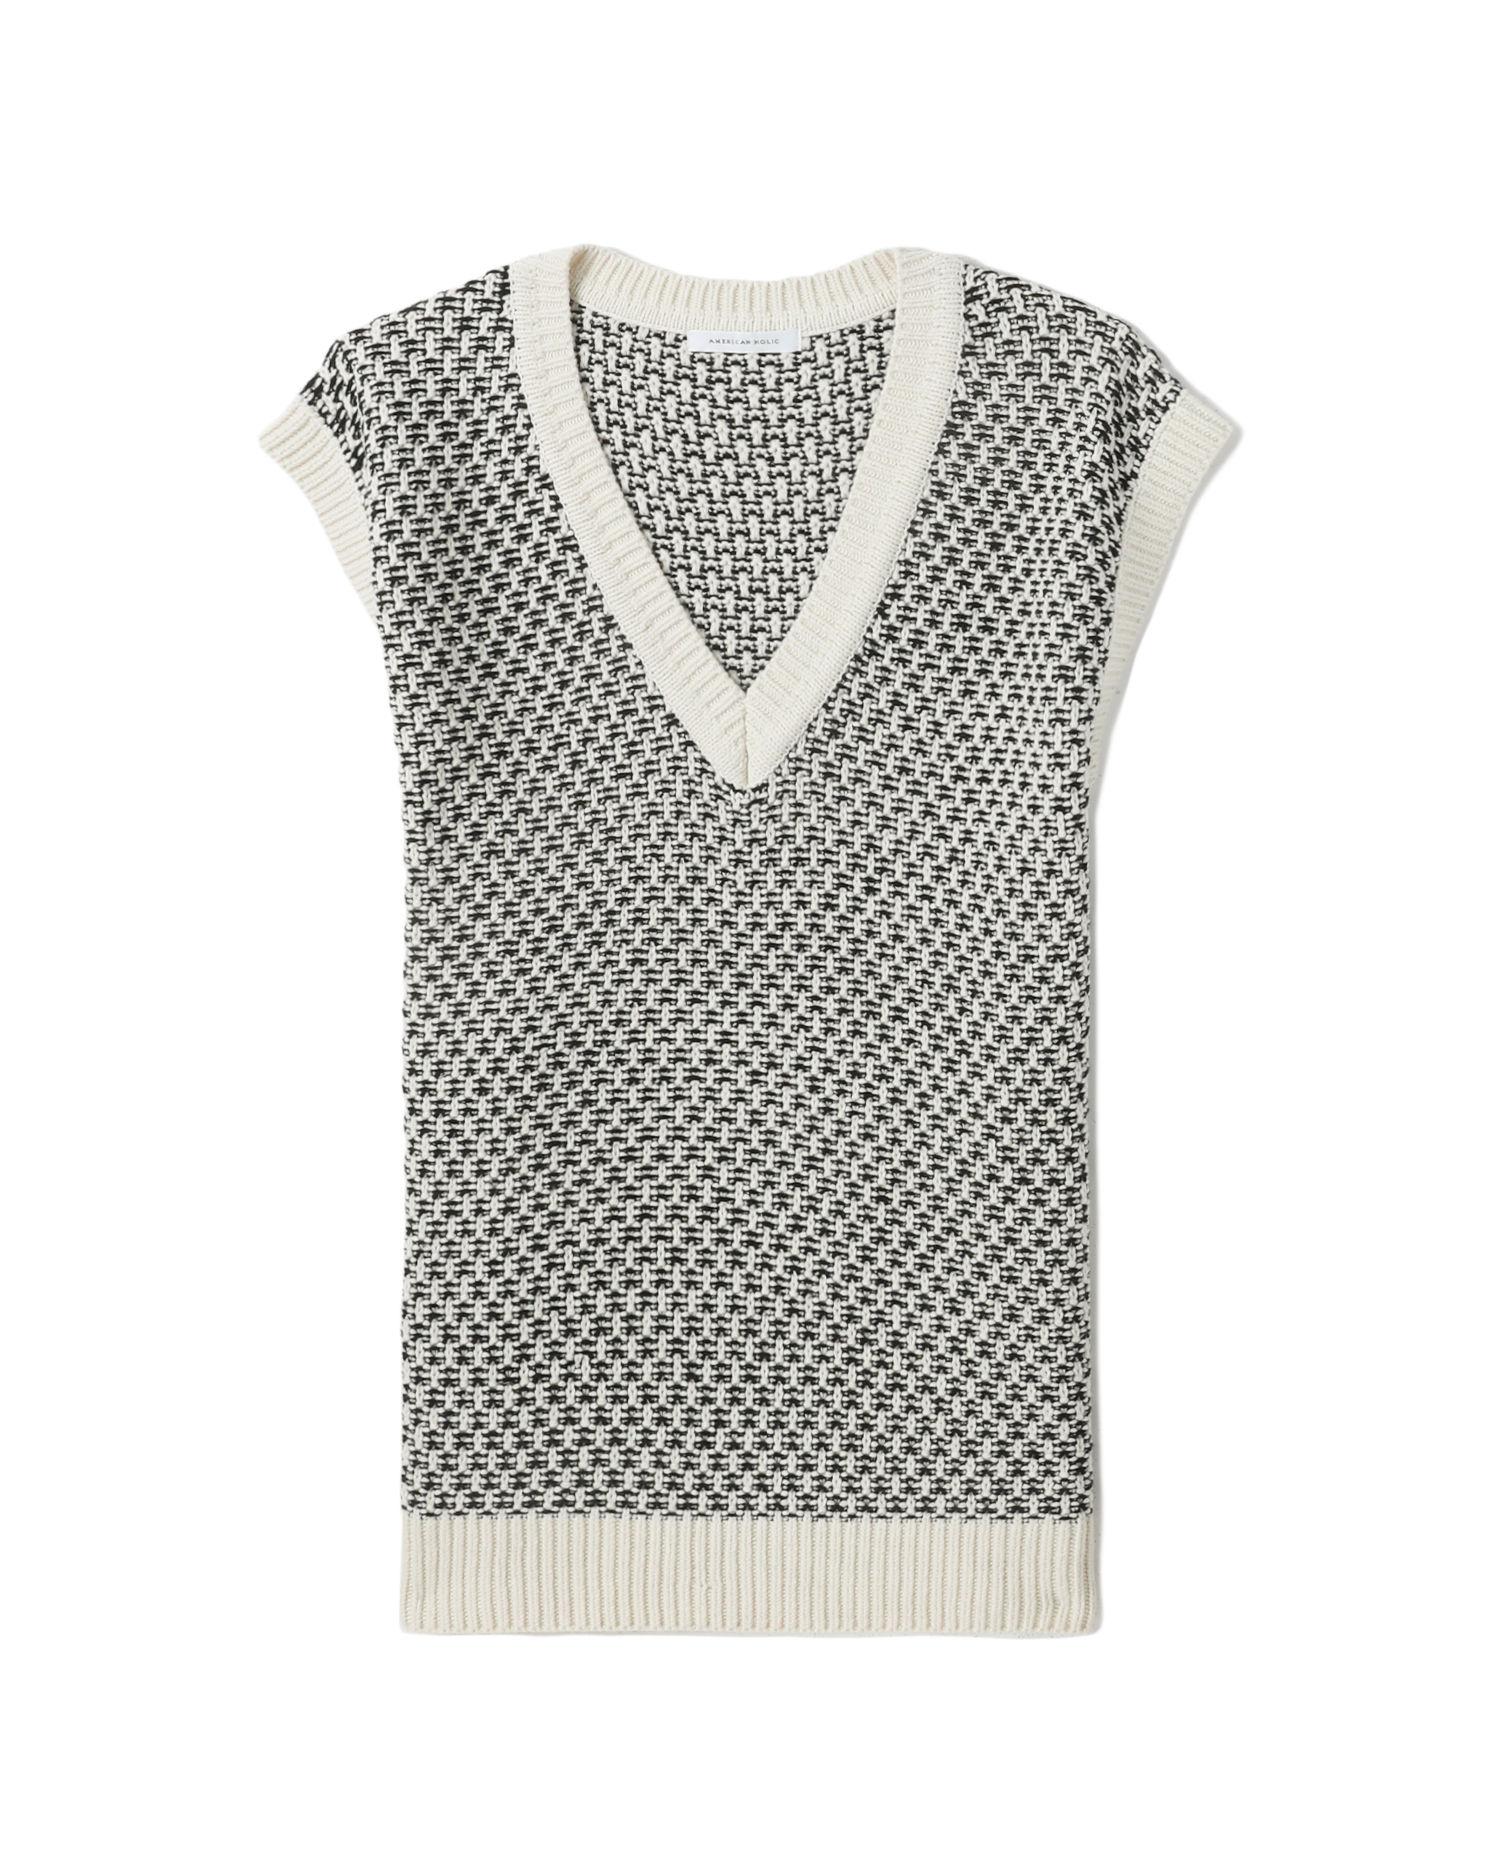 Relaxed V-neck vest by AMERICAN HOLIC